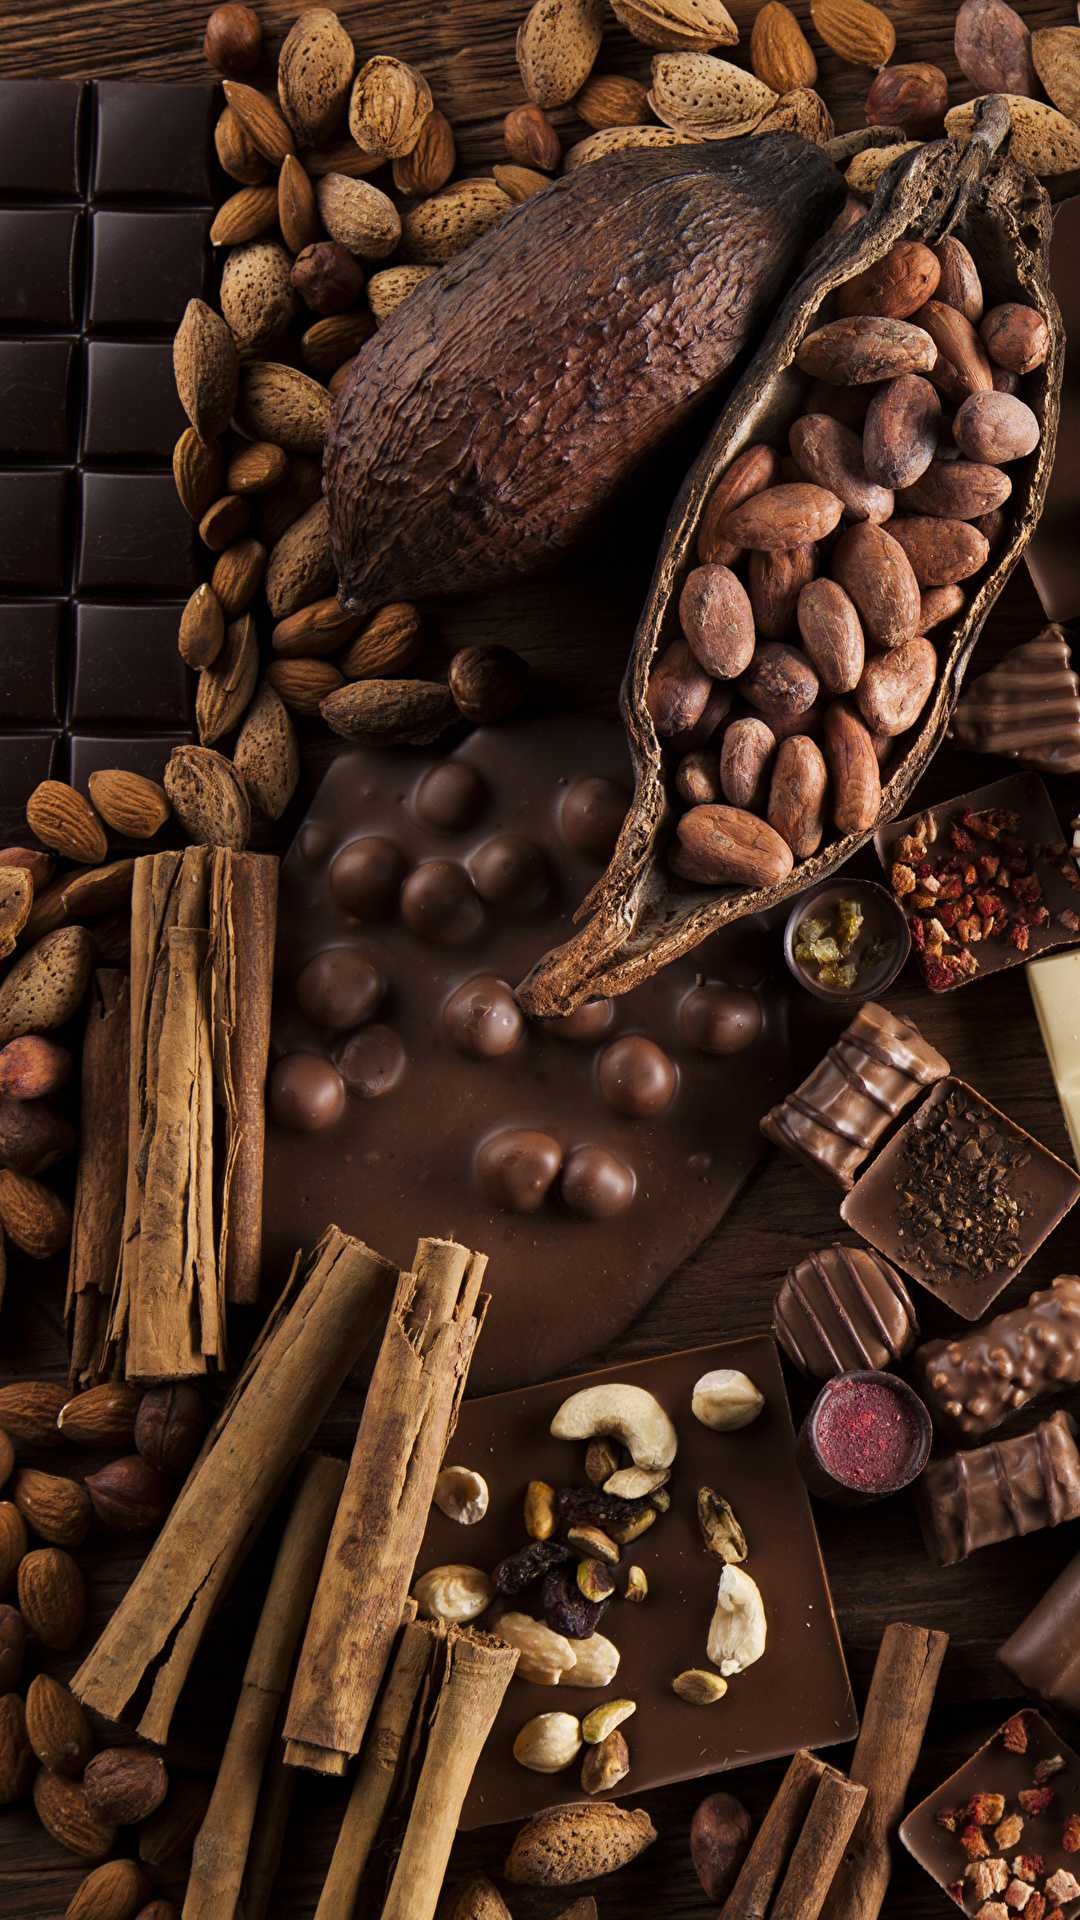 Chocolate: The fruit of the cacao, the seeds of an evergreen tree in the family Malvaceae. 1080x1920 Full HD Wallpaper.